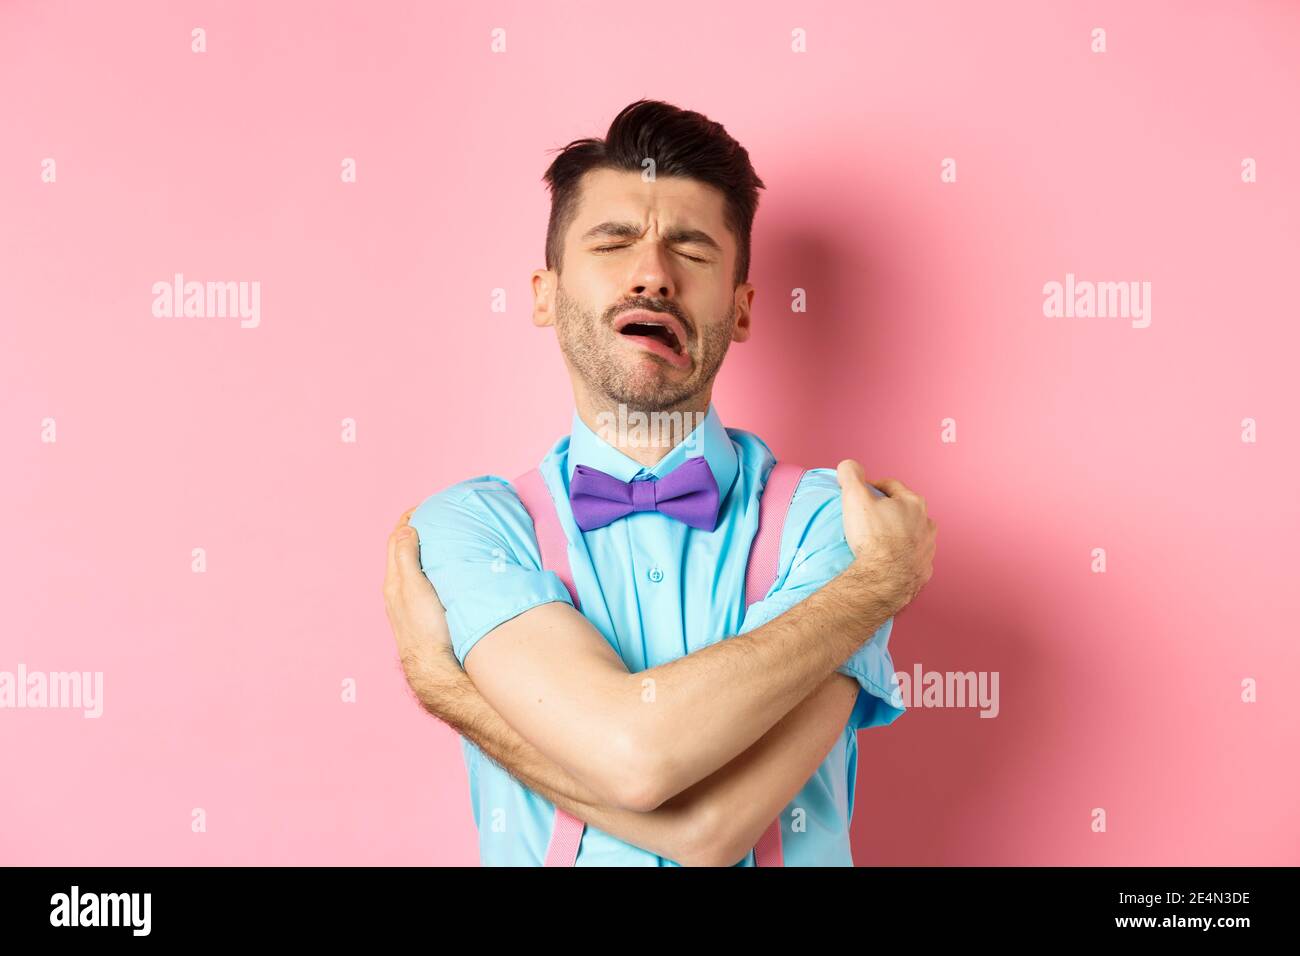 Crying guy hugging himself, feeling sad and lonely, standing unhappy on pink background Stock Photo